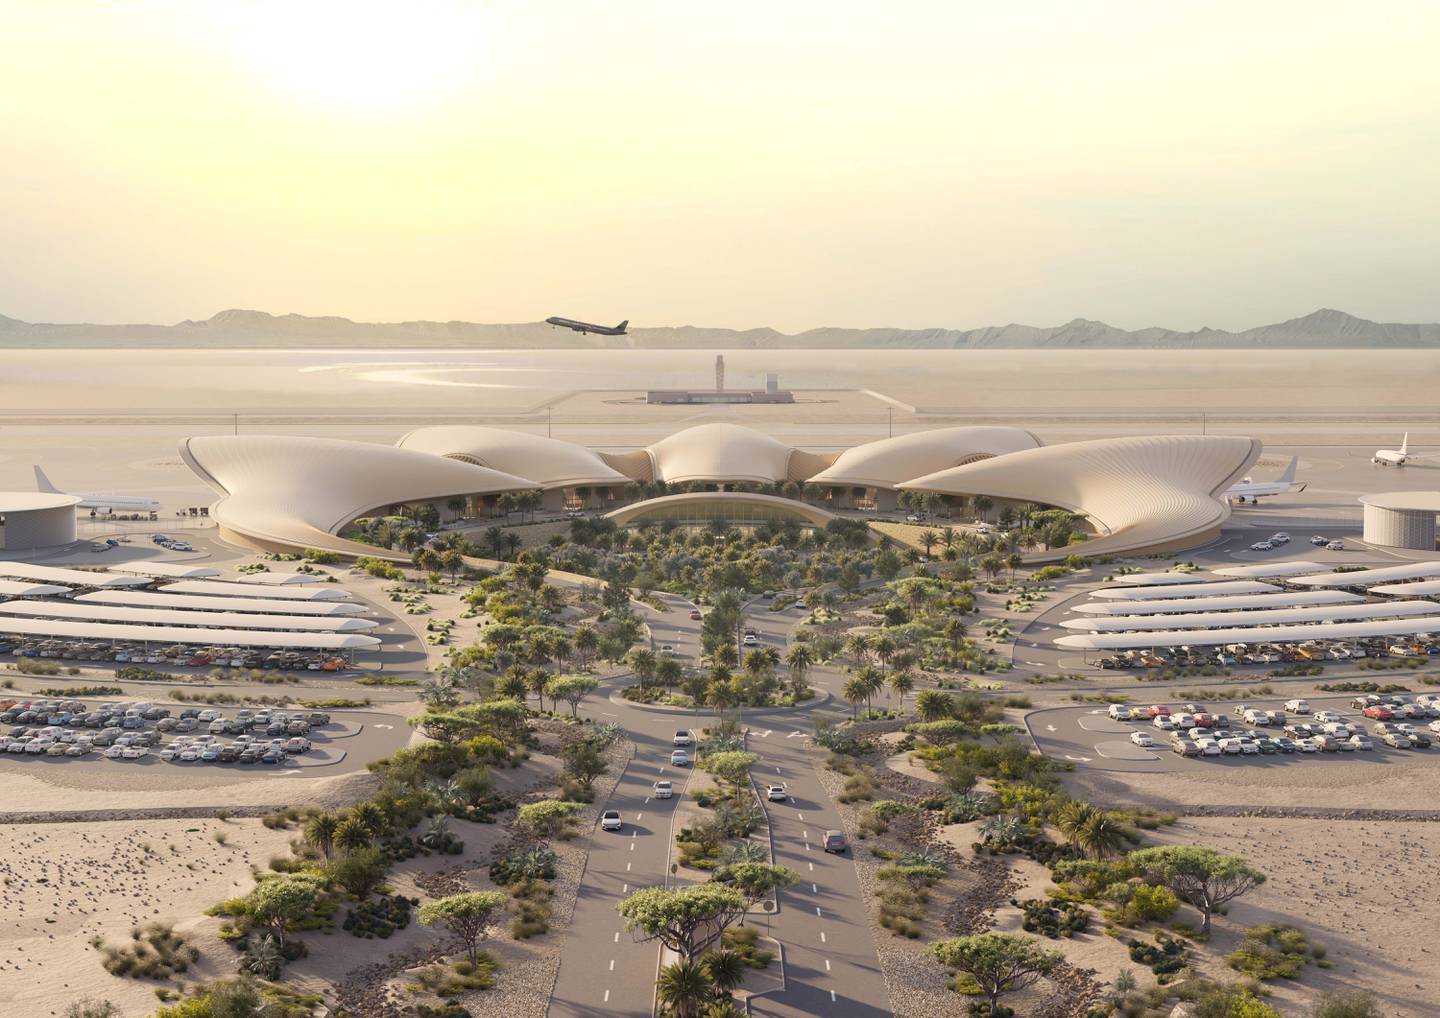 Red Sea International Airport, being designed by Foster + Partners, is under construction. Photo: Red Sea Global